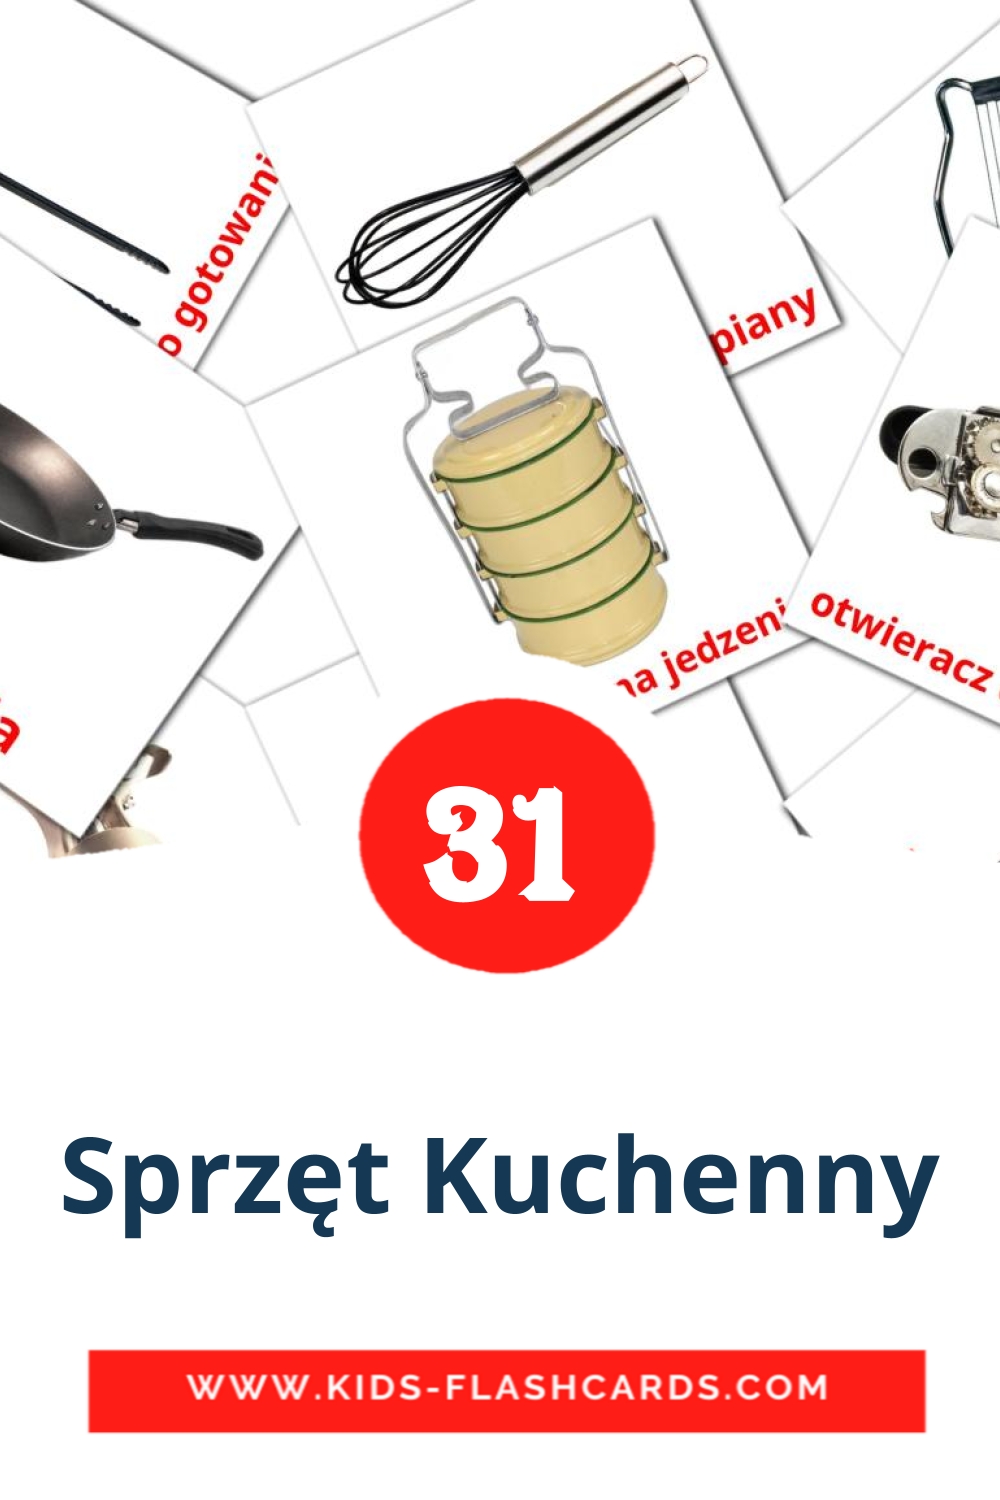 35 Sprzęt Kuchenny Picture Cards for Kindergarden in polish